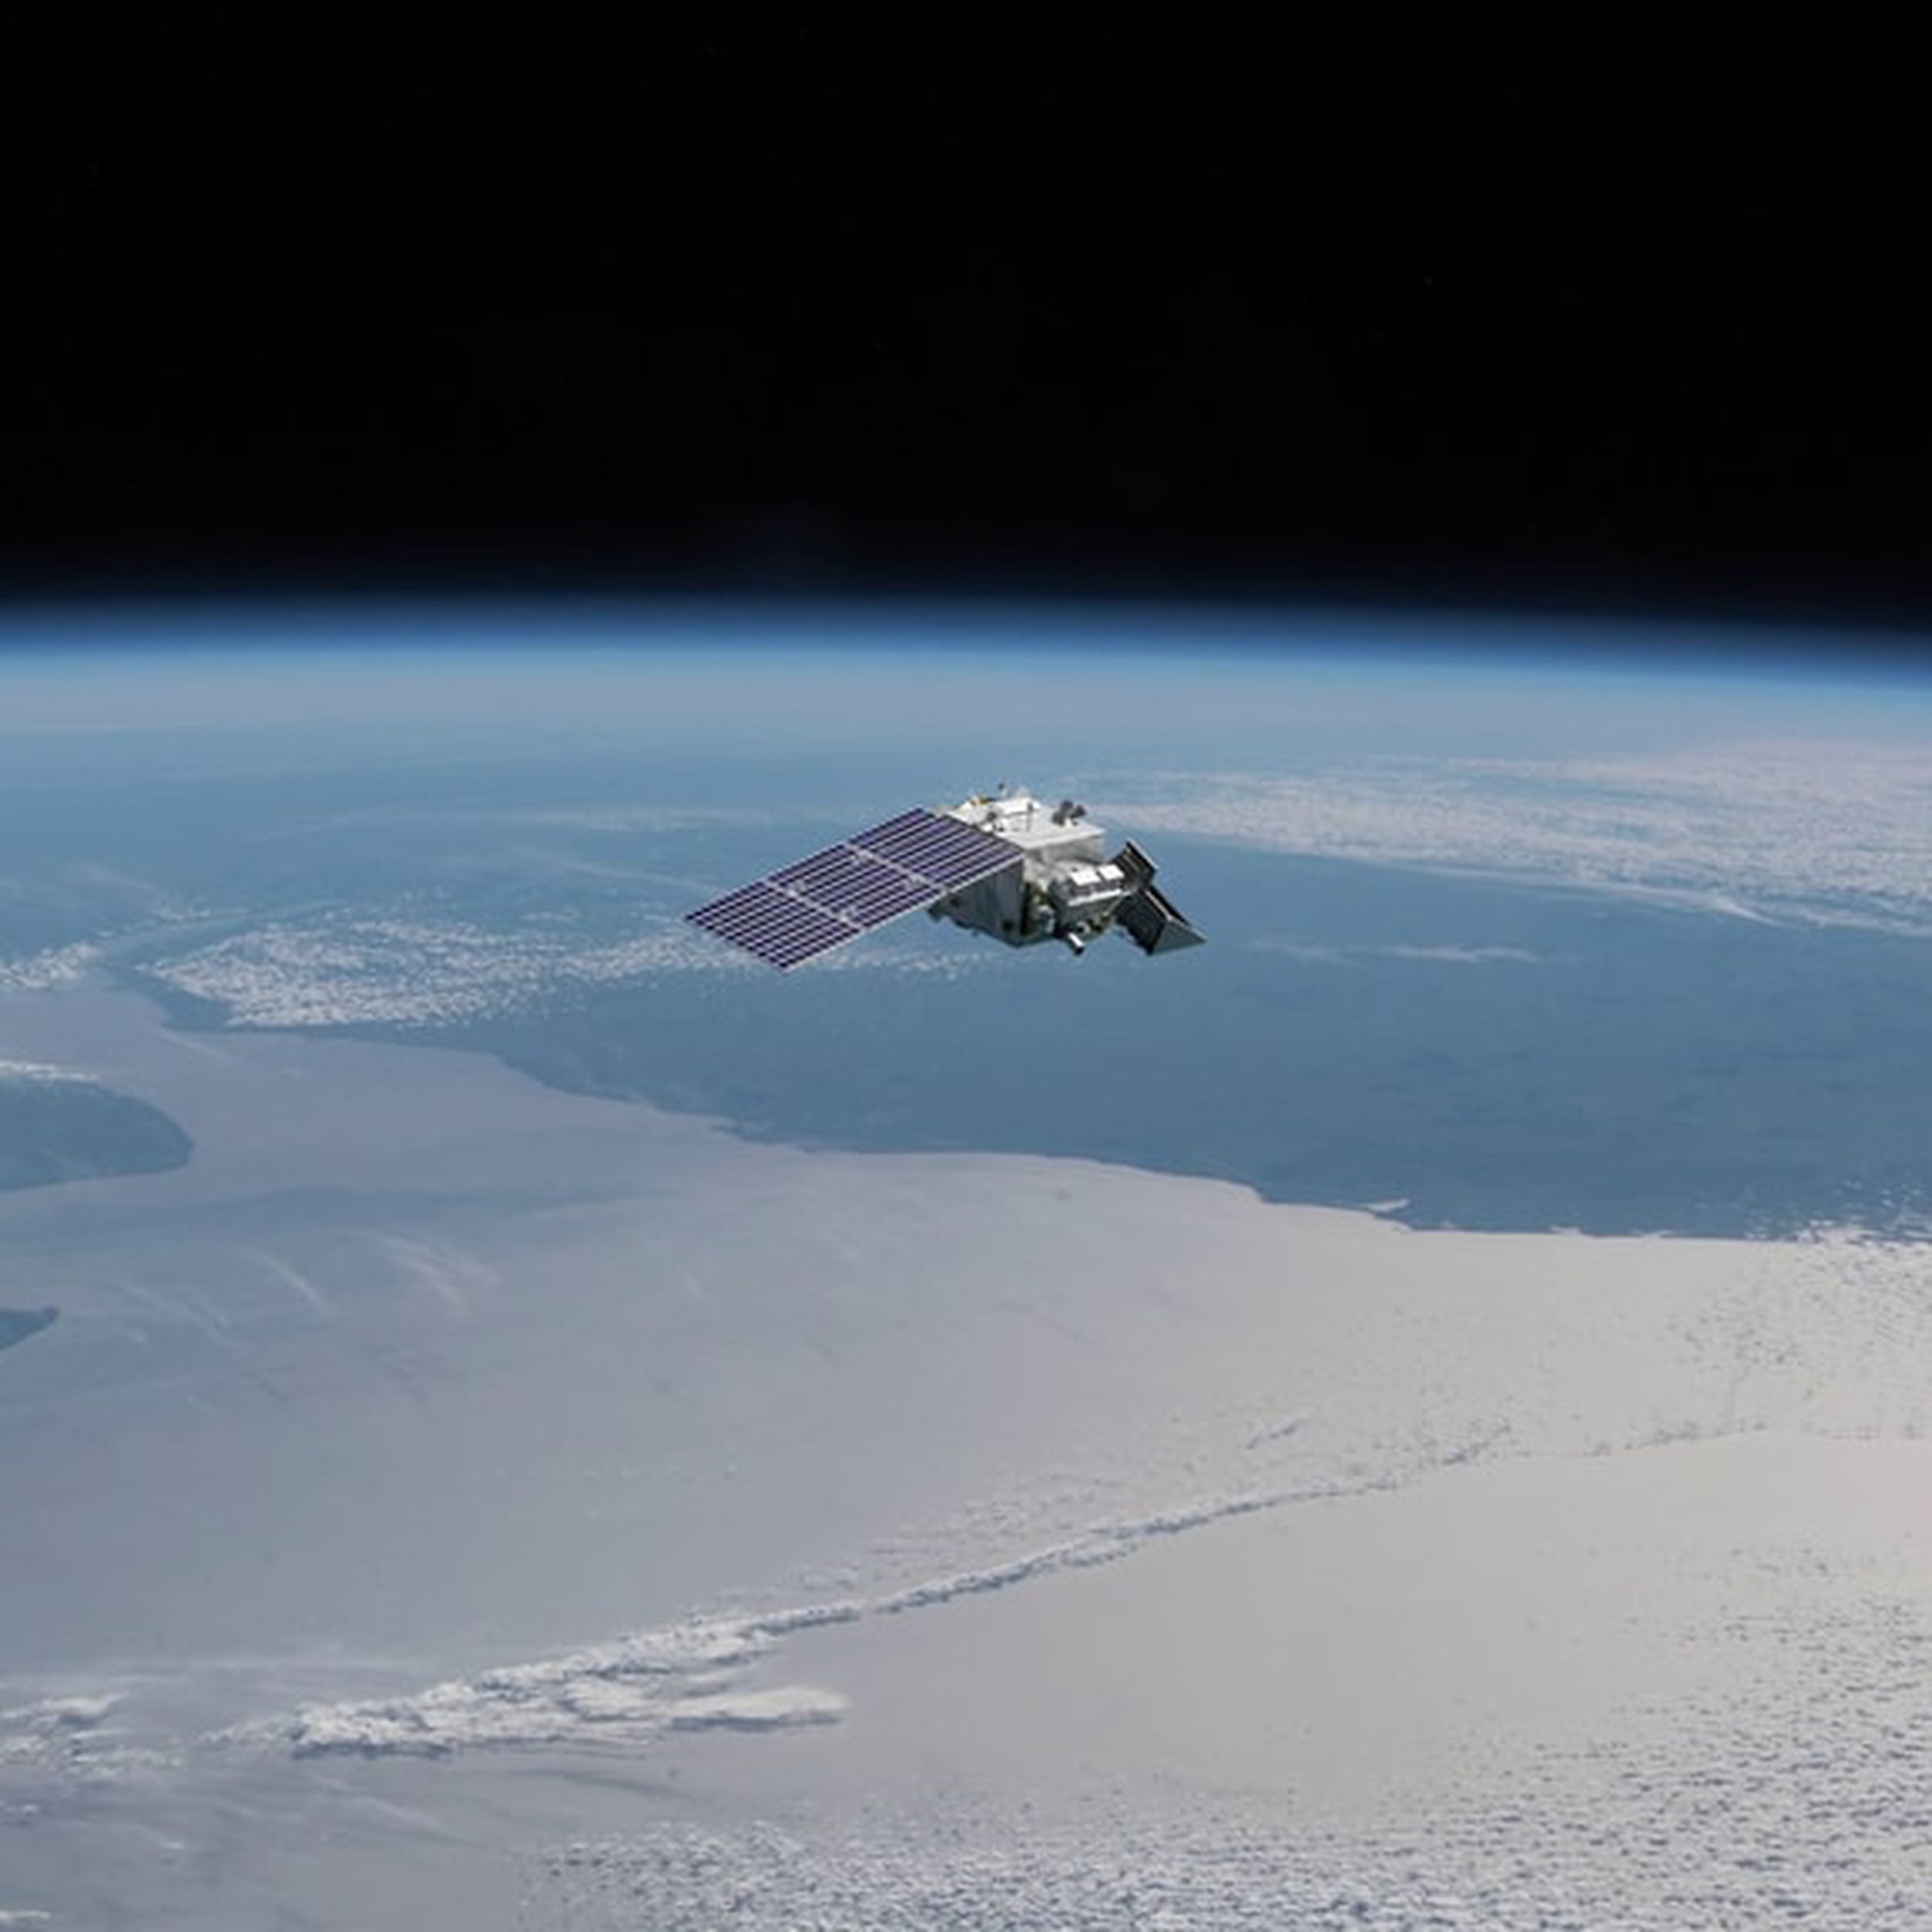 A rendering of a satellite seen above clouds, sea, and land masses.